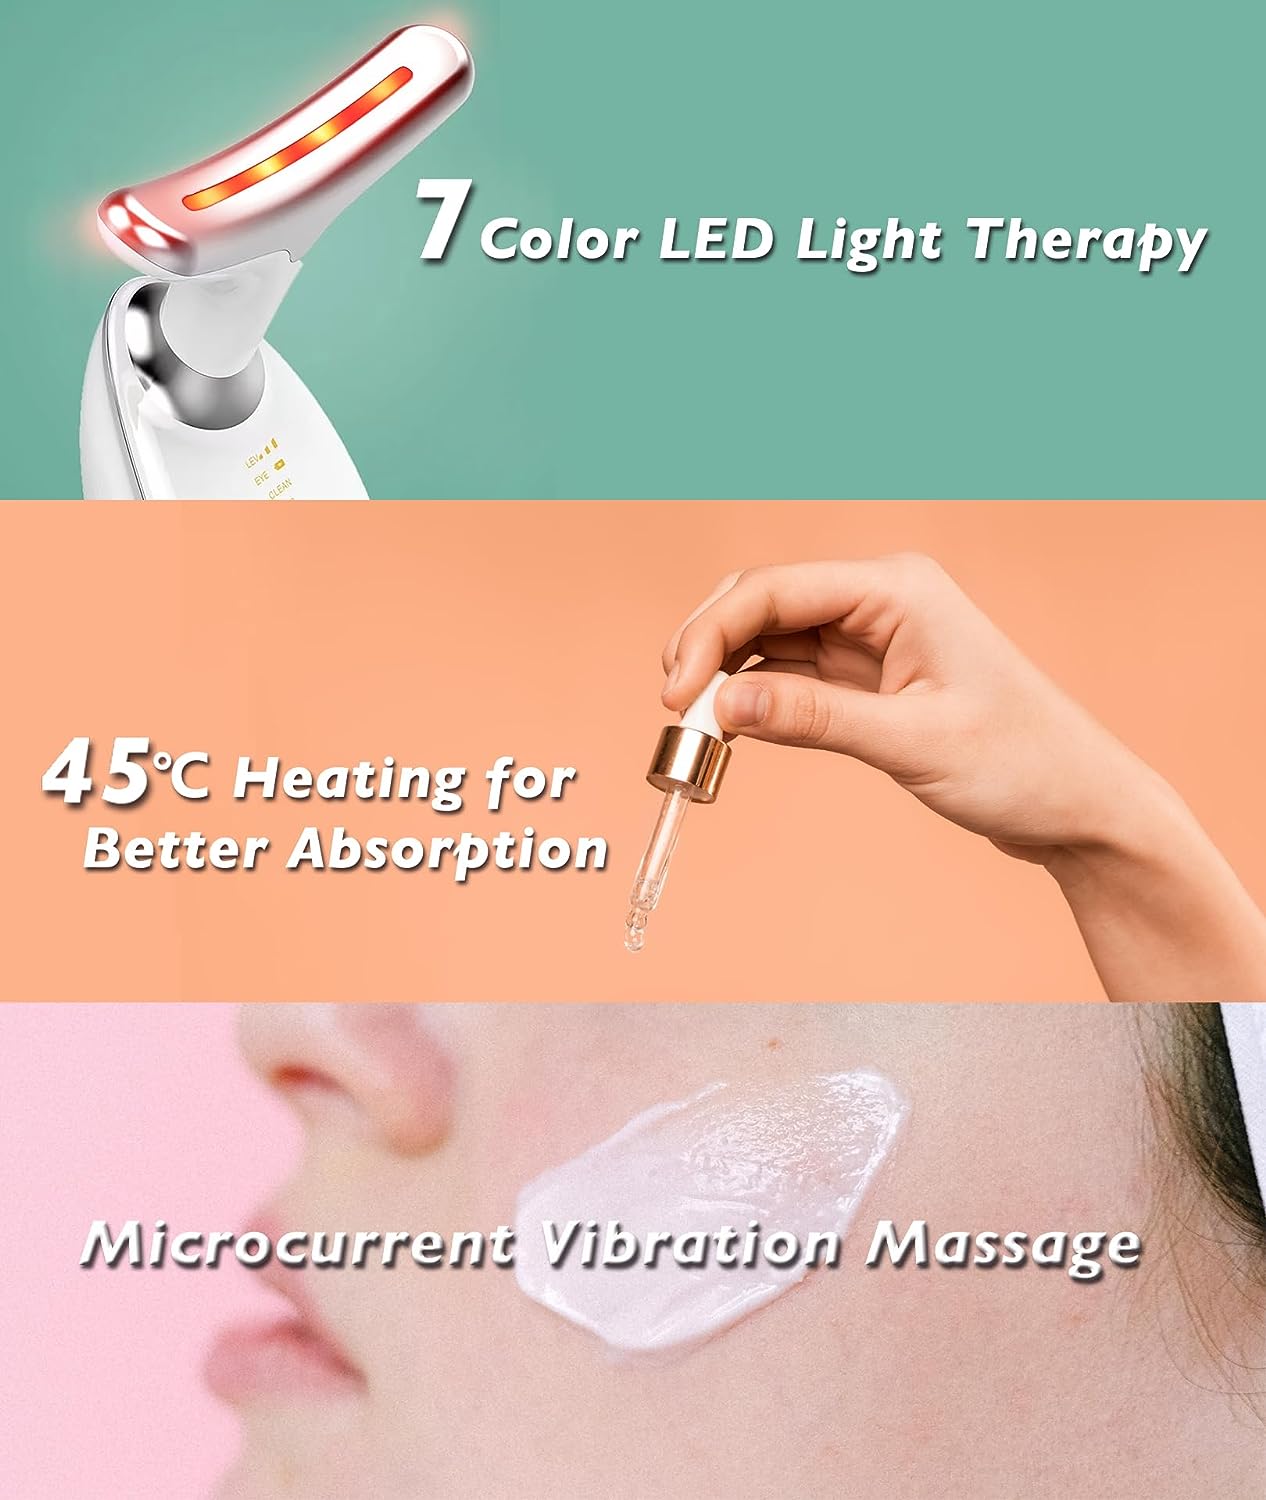 Fastaid Red-Light-Therapy-for-Face and Neck, Red Light Therapy Wand, 7 Color Led Face Neck Massager for Skin Tightening, Face Lift, Wrinkle Removal, White